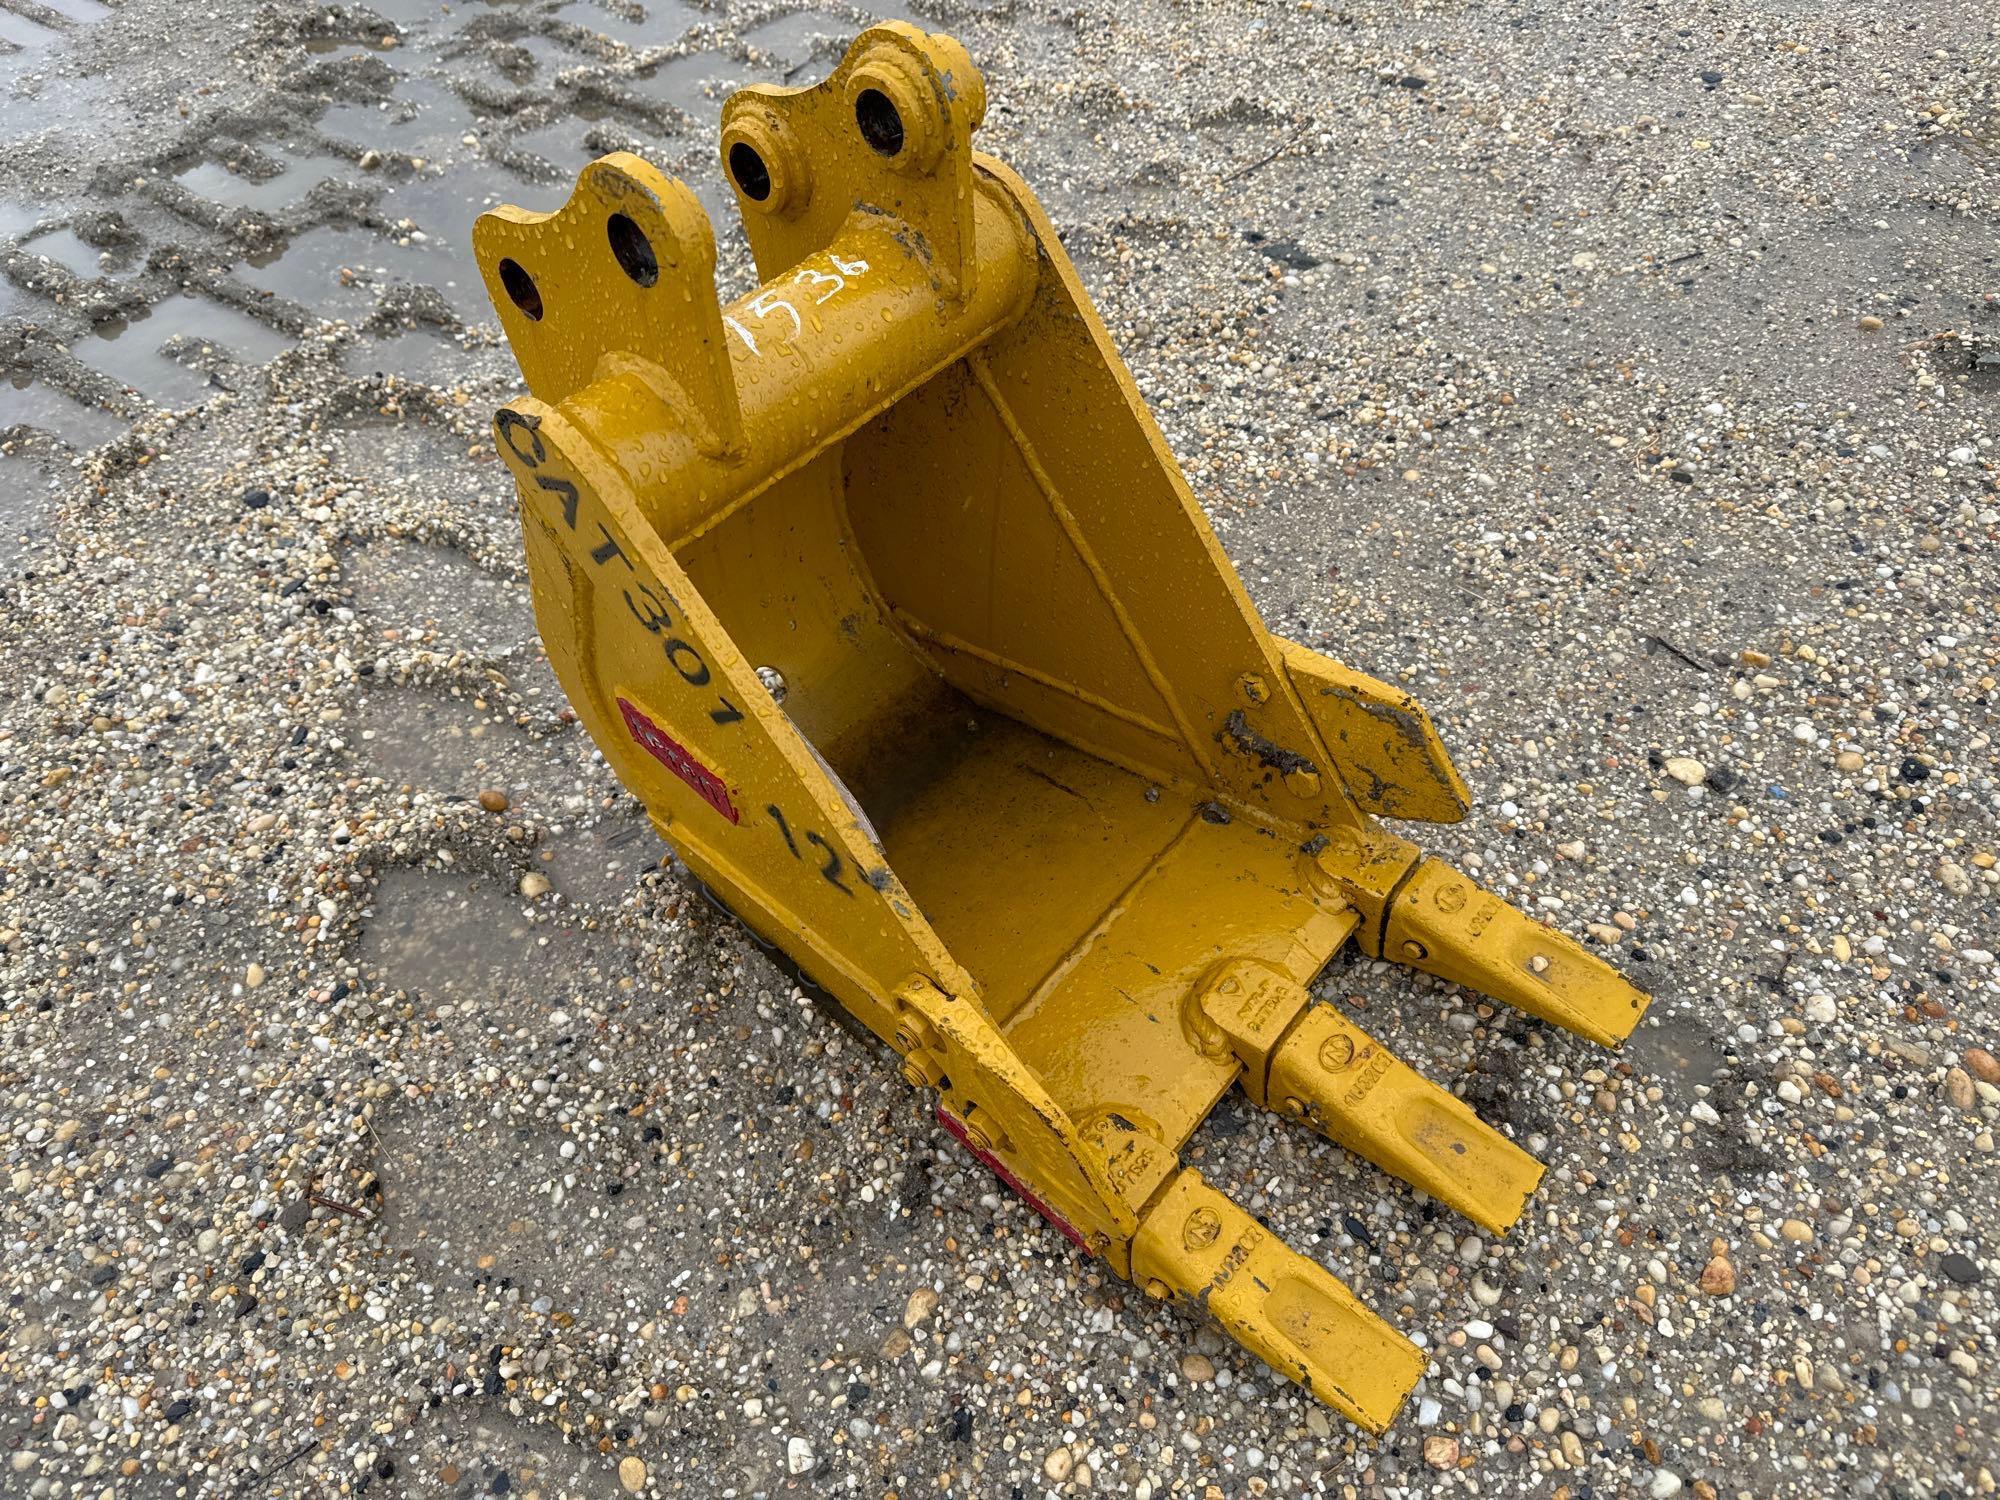 NEW TERAN 12IN. DIGGING BUCKET EXCAVATOR BUCKET FOR CAT 301 WITH SIDE CUTTERS AND 3HD TIPS.